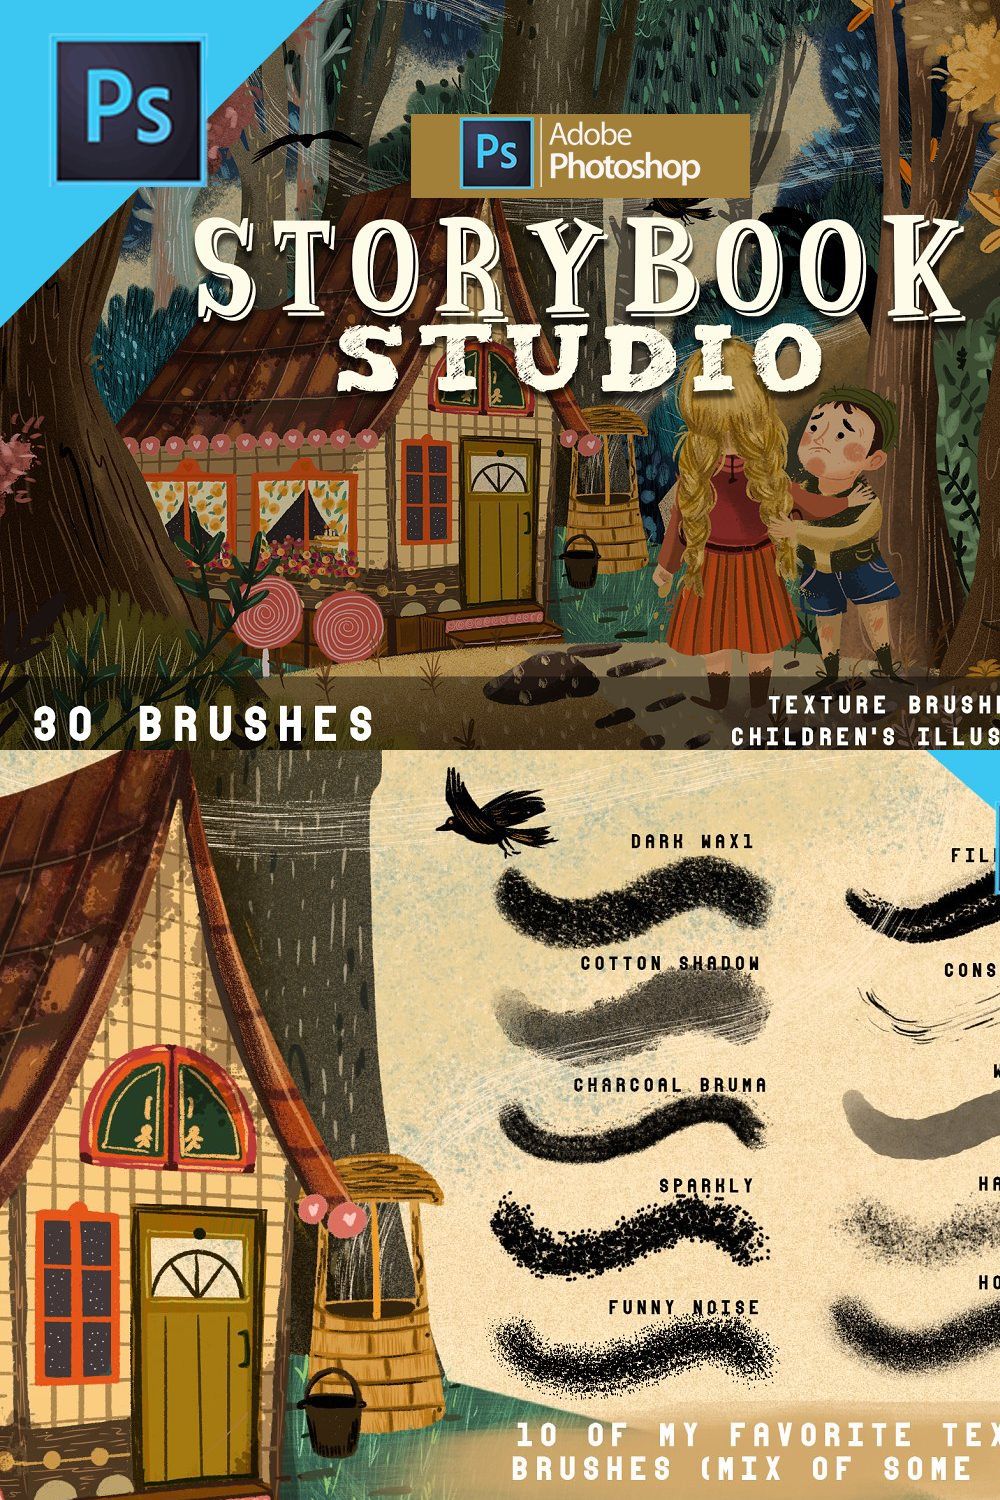 Storybook studio Photoshop pinterest preview image.